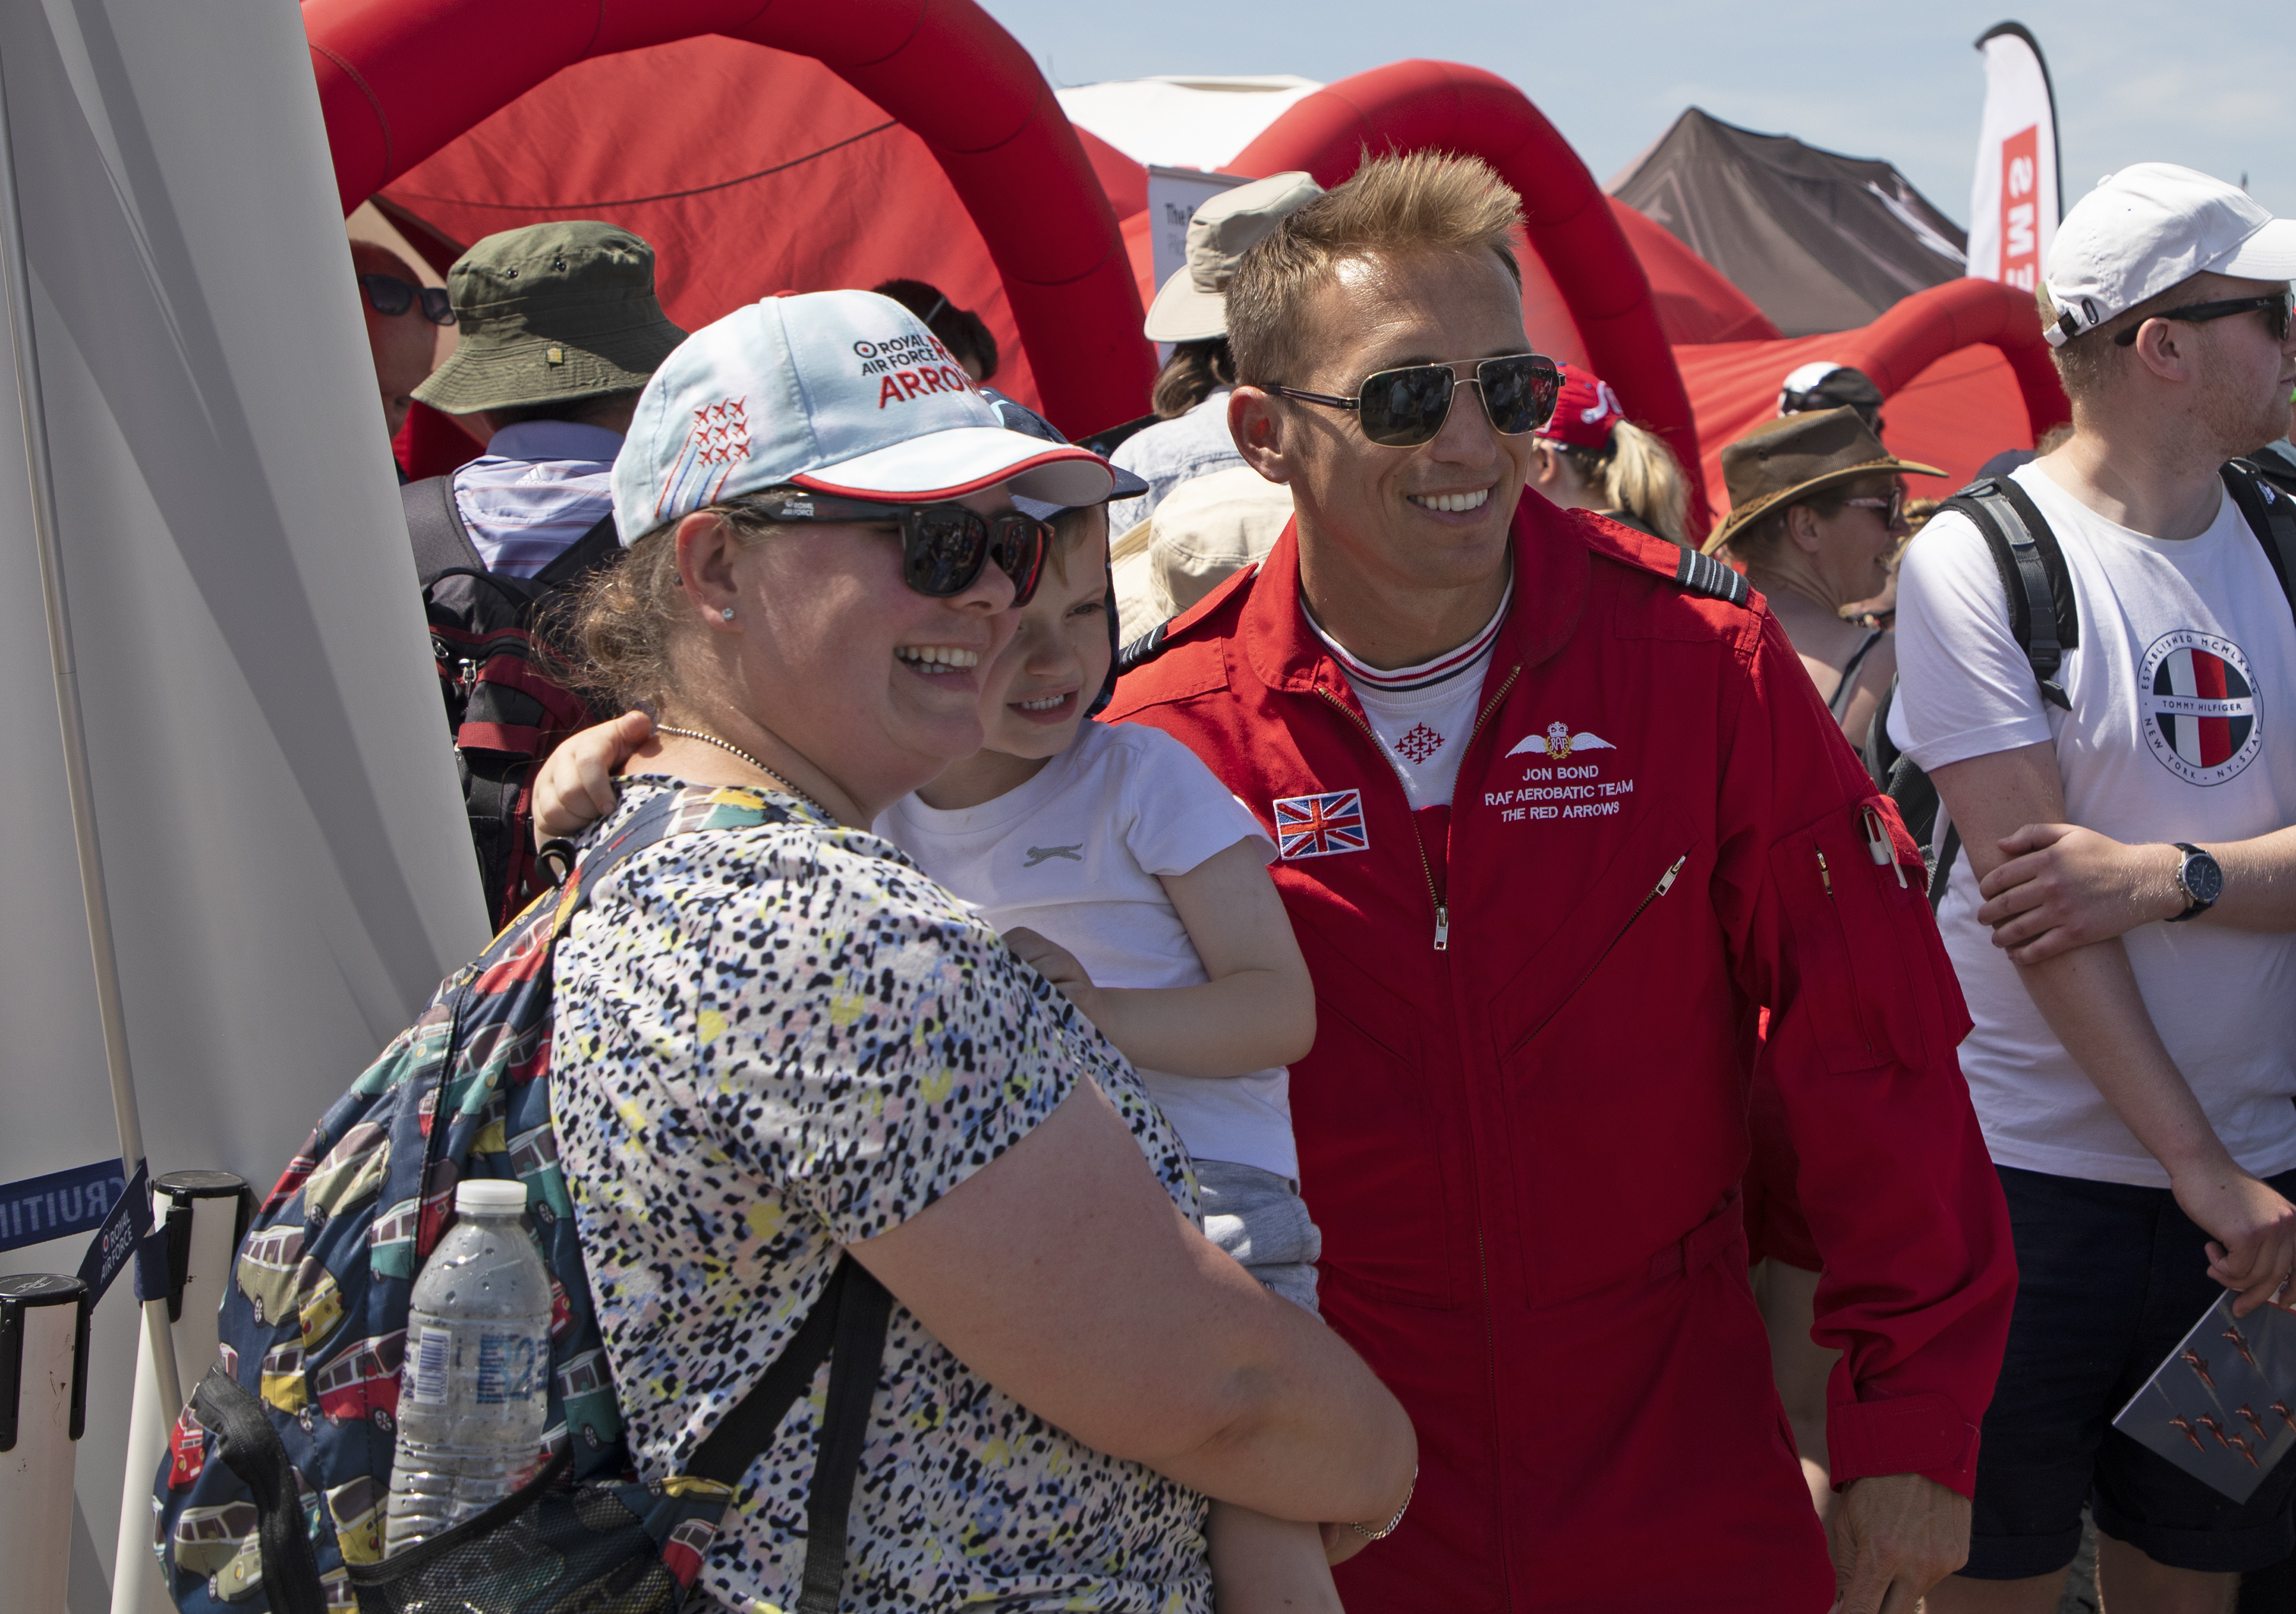 Red 1 - Squadron Leader Jon Bond - says his aim for the team is to inspire even more people at airshows across 2024.